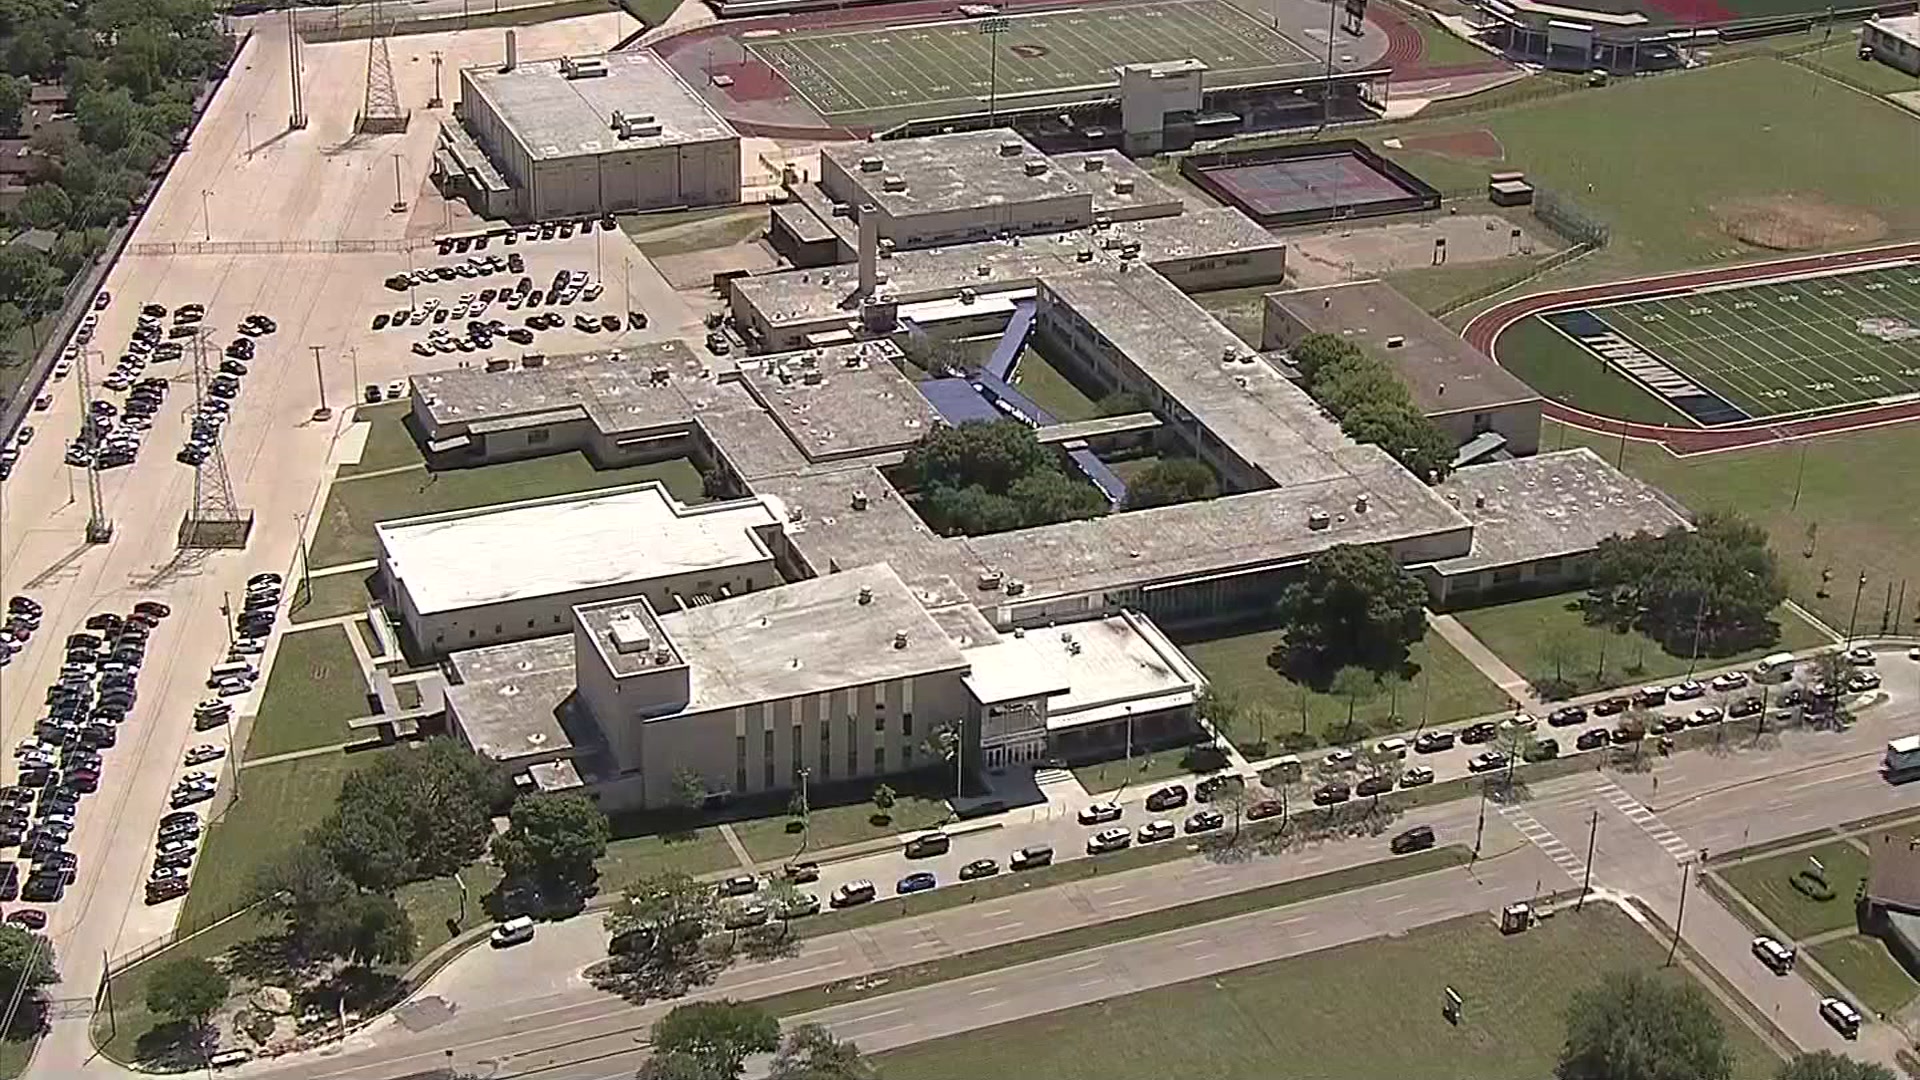 North Texas School Staffer Arrested, Accused of Assault picture photo pic